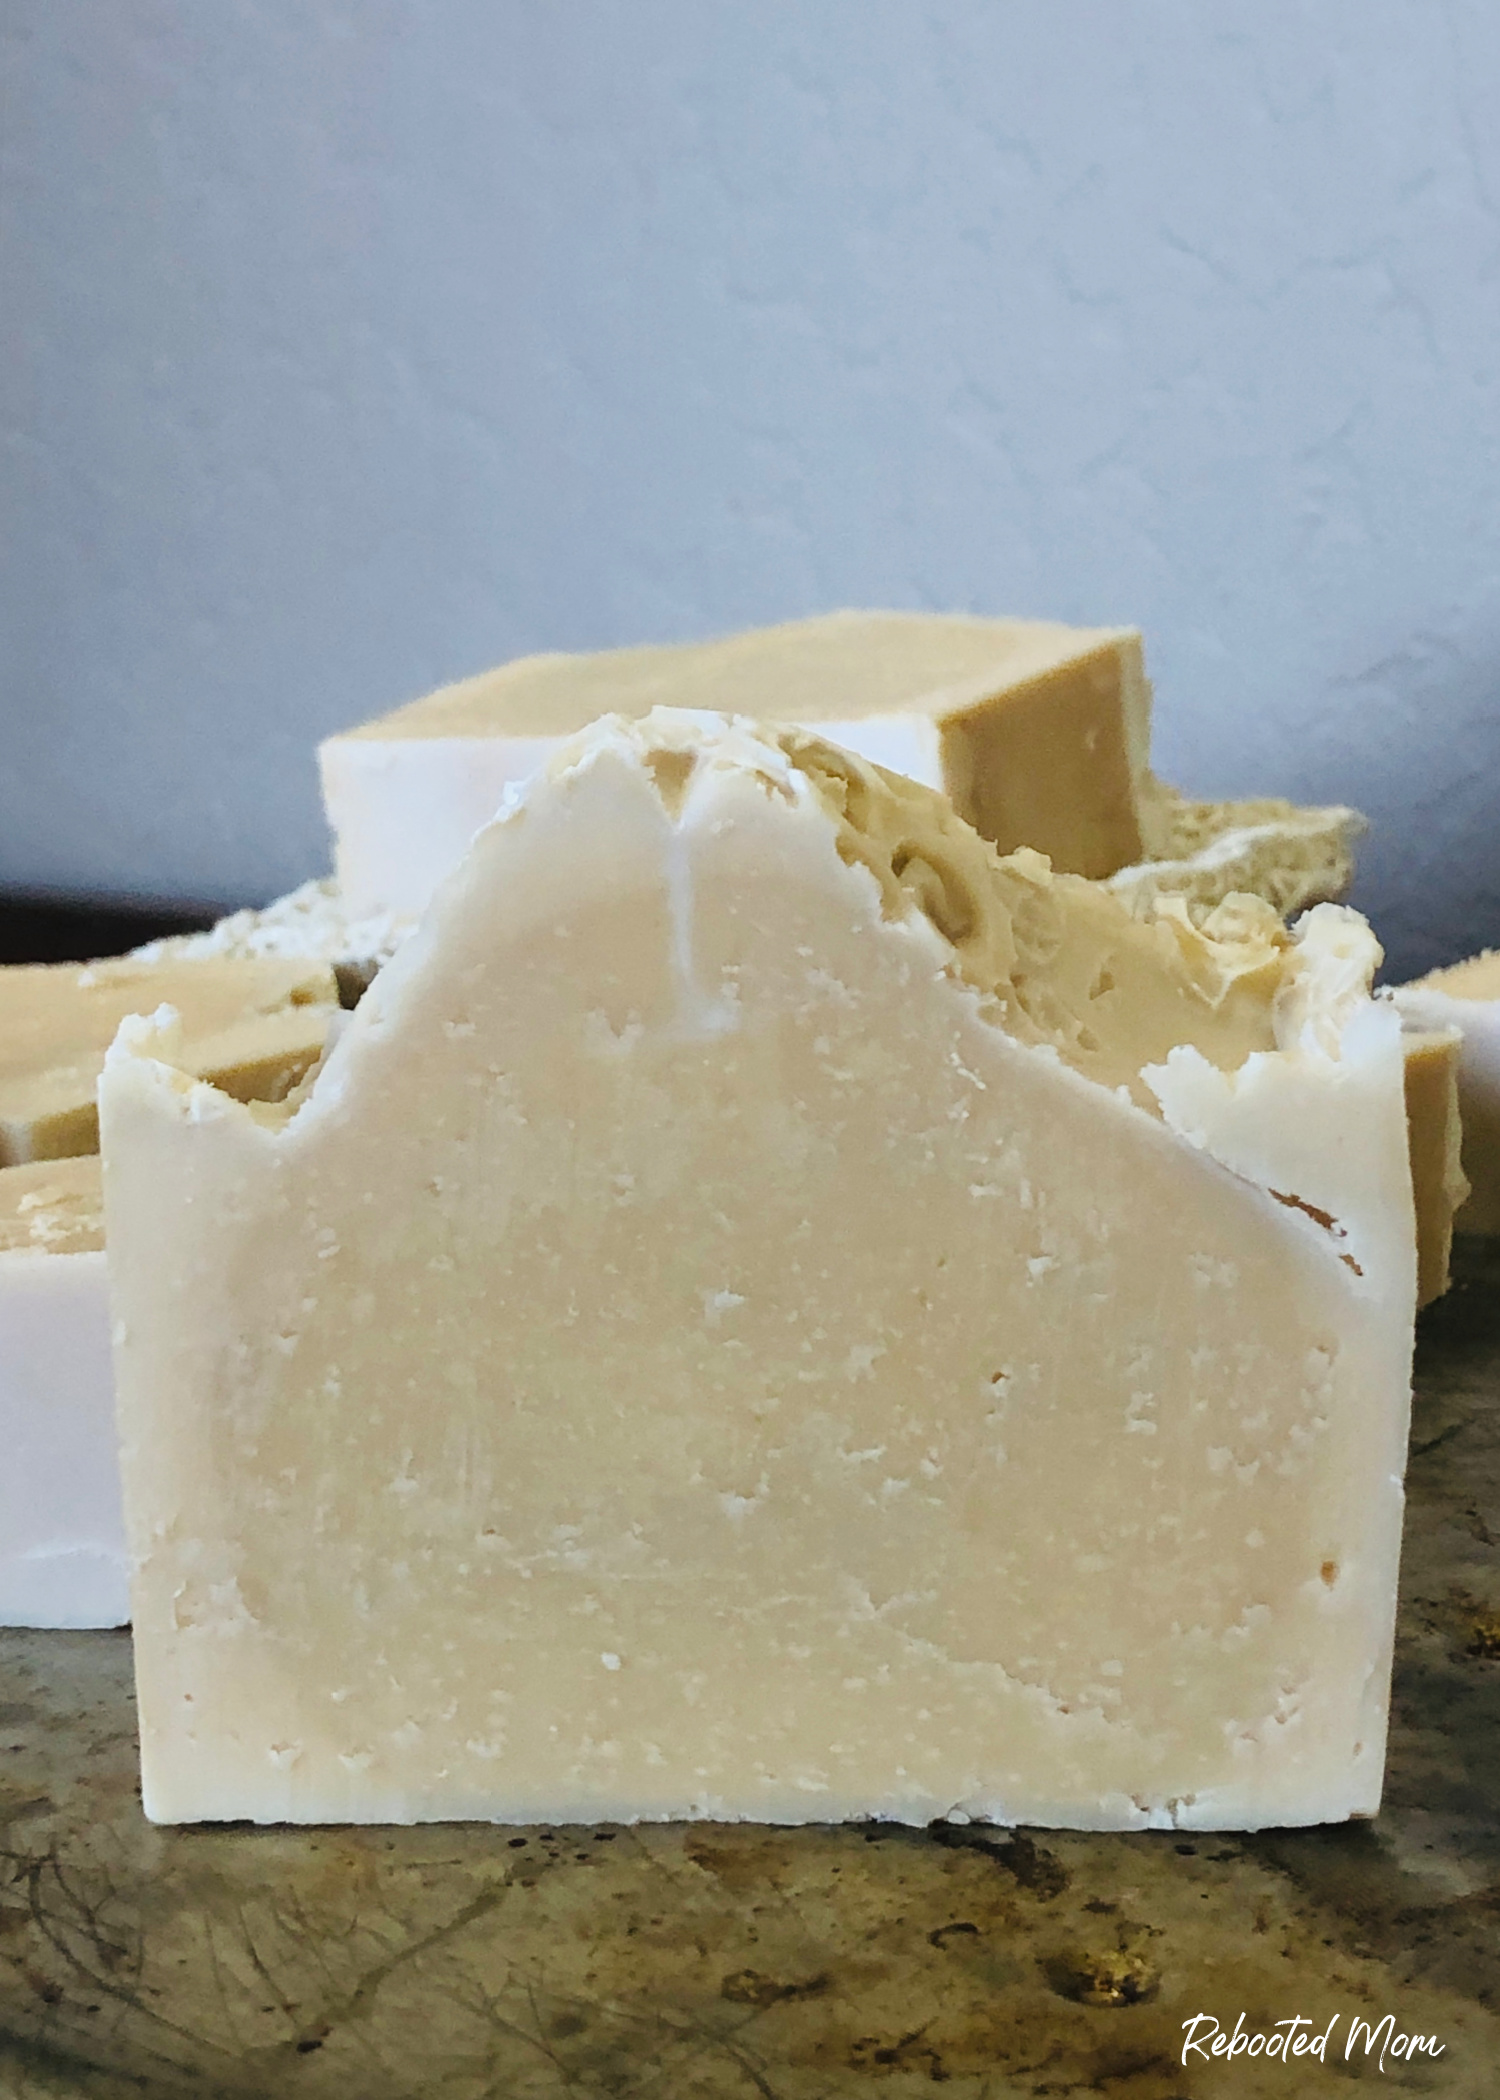 Step by step instructions to make cold process beeswax and honey soap -- a fantastic soap that creates a hard bar that's gentle on skin for all ages!